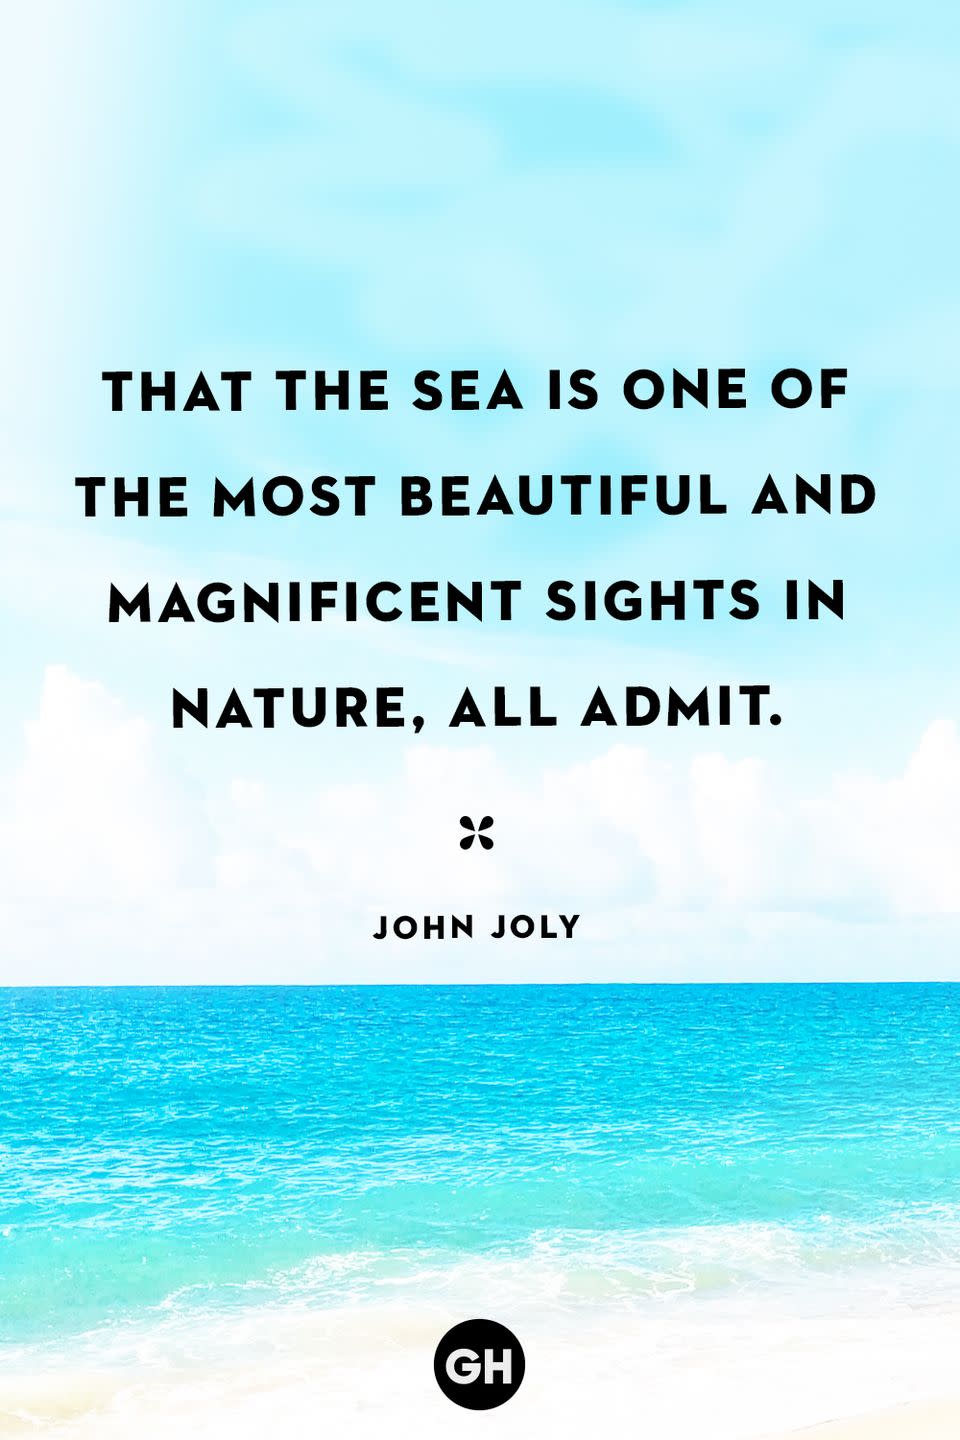 <p>That the sea is one of the most beautiful and magnificent sights in Nature, all admit.</p>